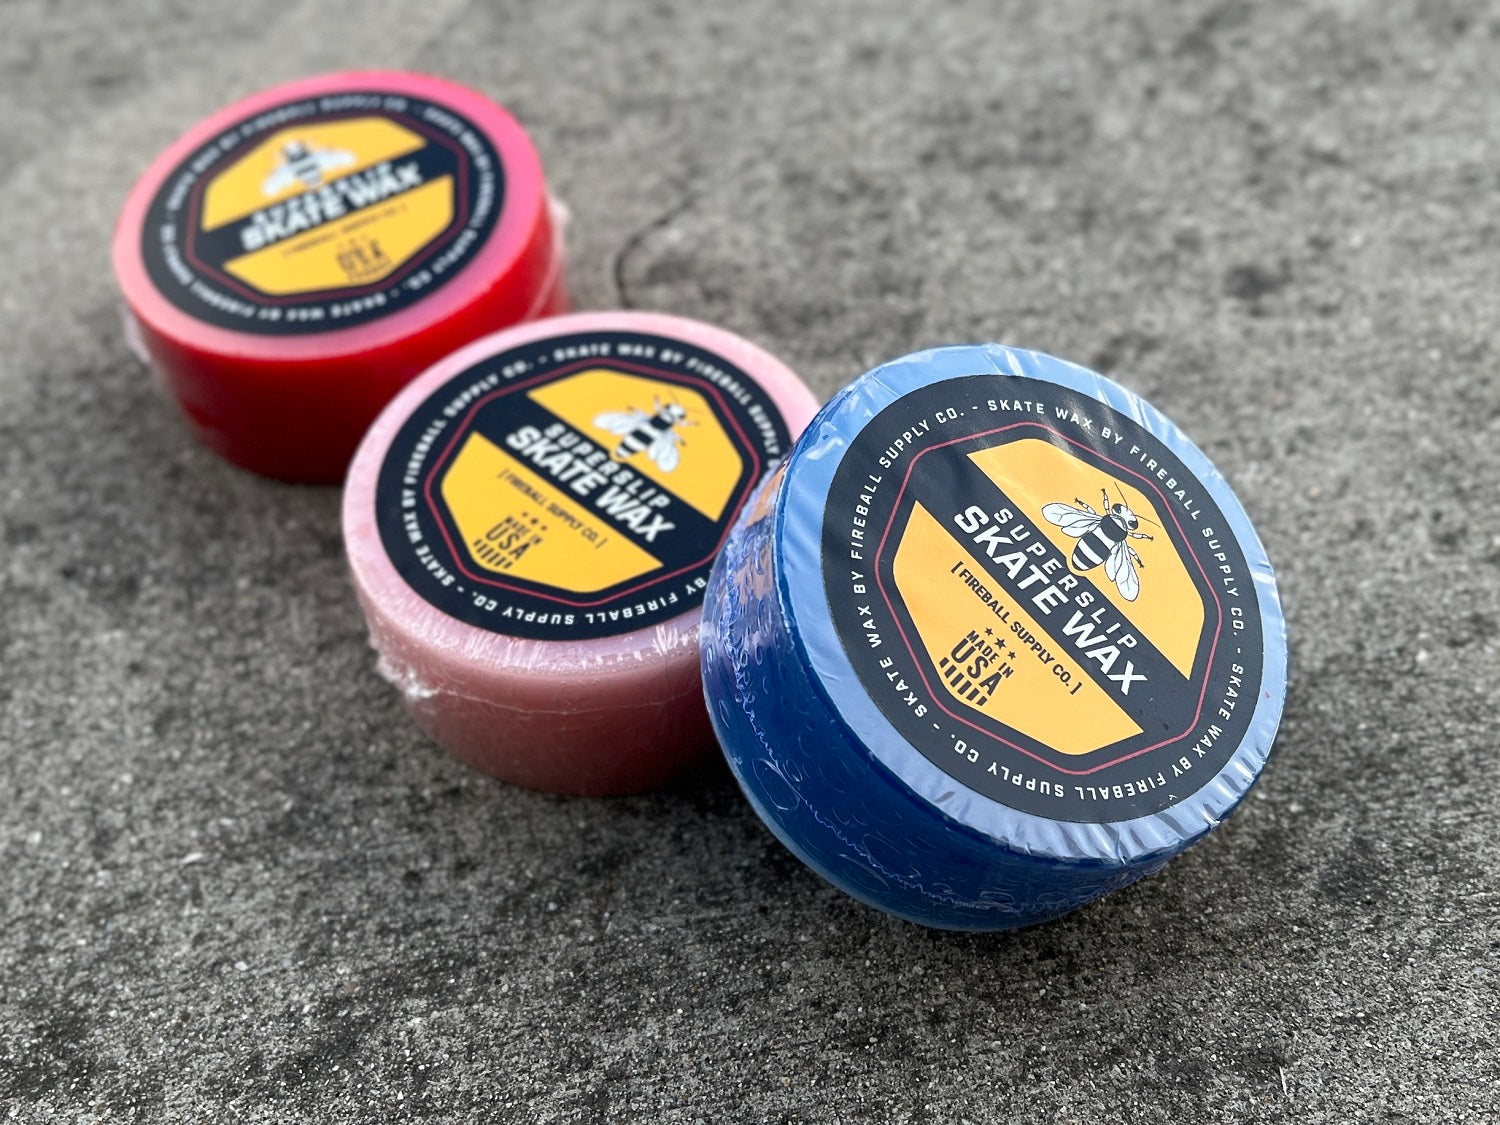 Fireball Supply Co. wax is made in USA at our Stoked Ride Shop warehouse.